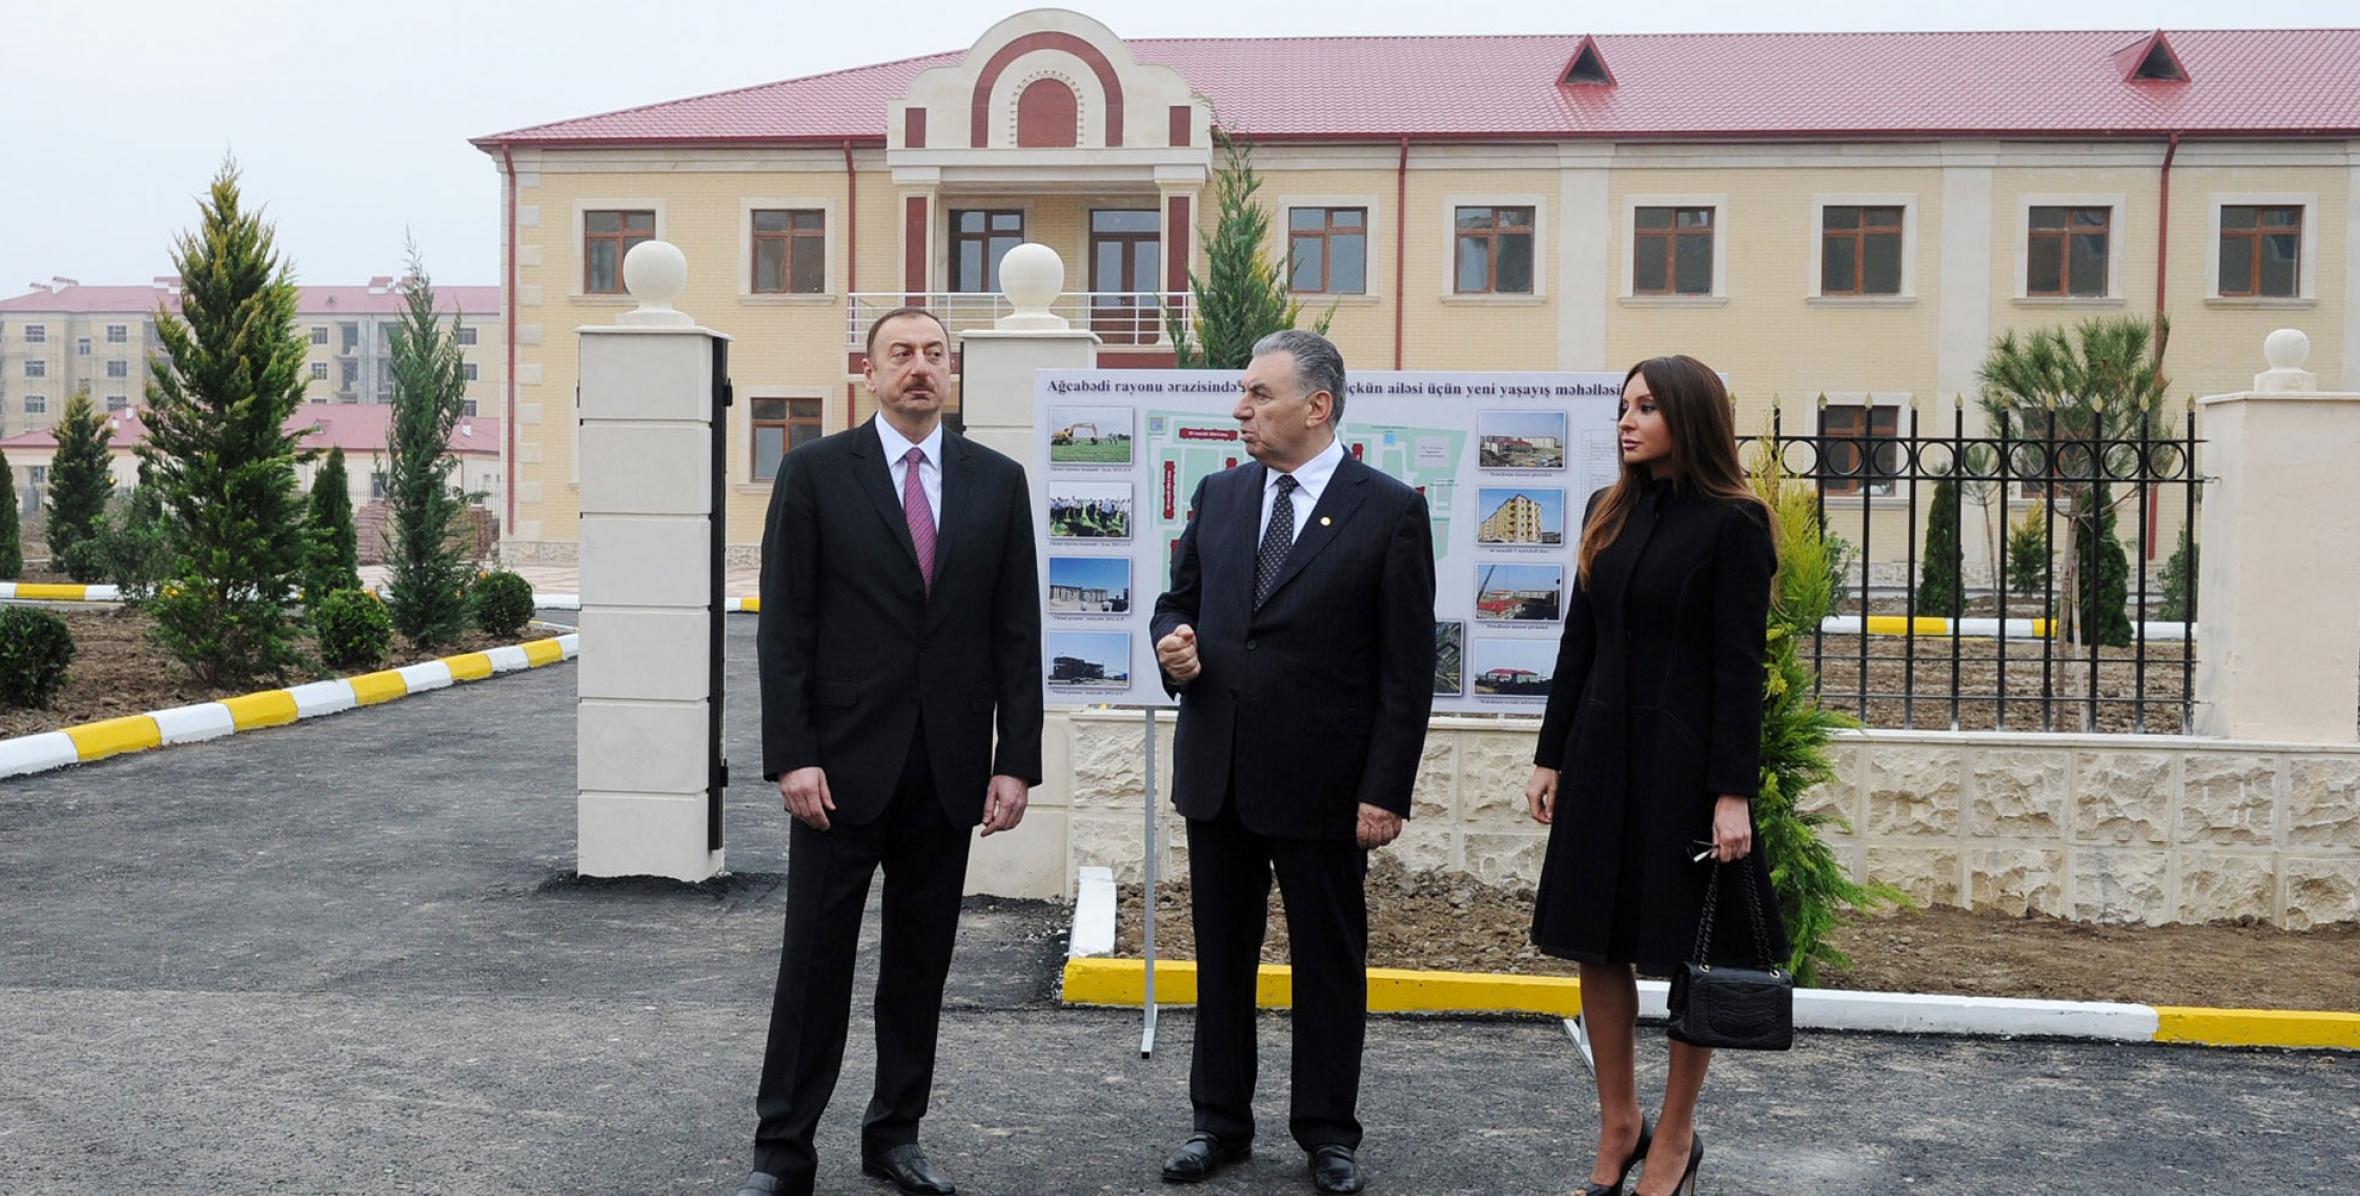 Ilham Aliyev reviewed residential buildings constructed for refugee and IDP families in Agjabadi District